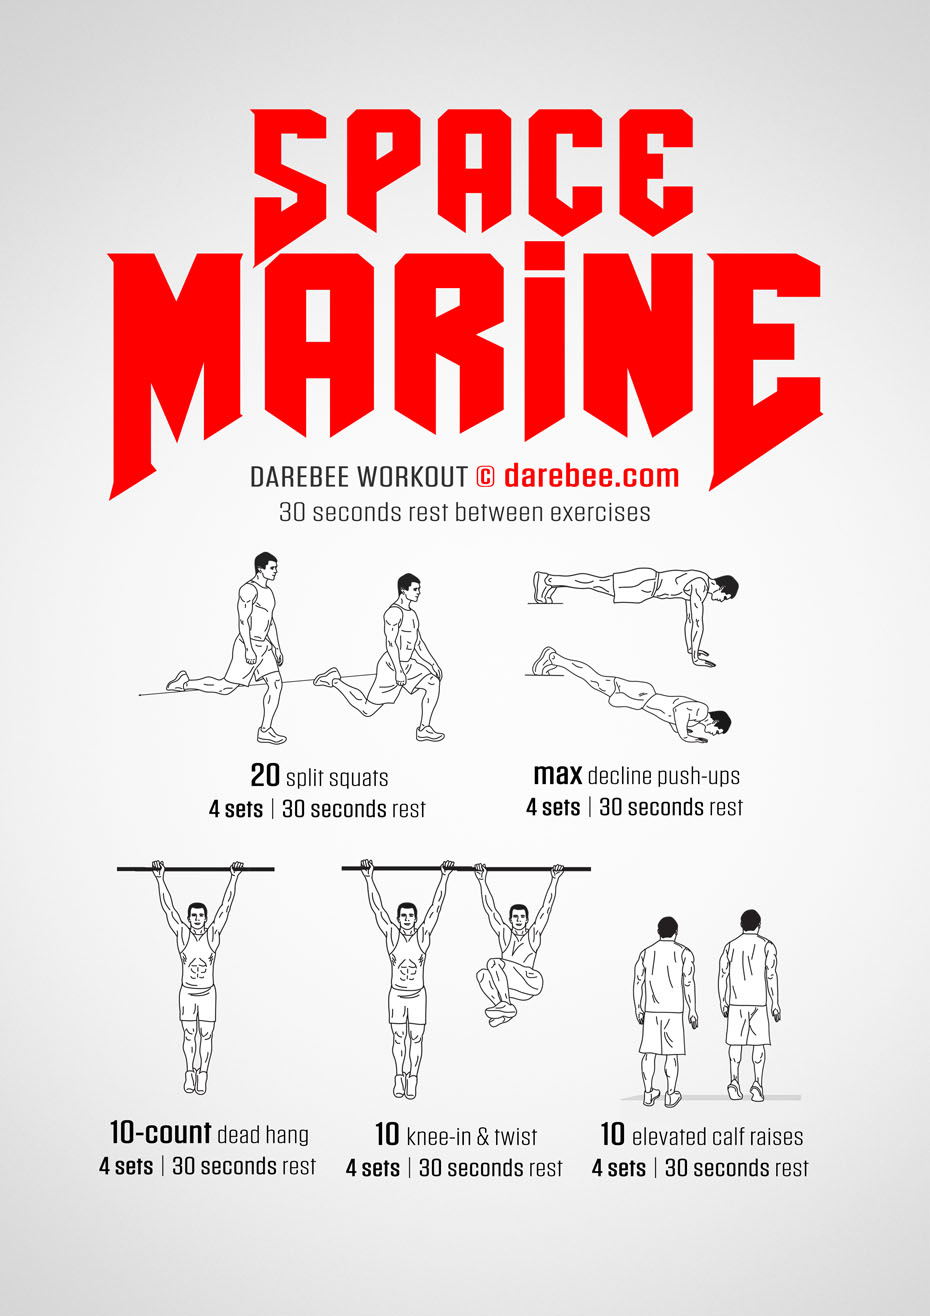 Space Marine is a Darebee home fitness, total-body strength workout that will test your strength and help you level up in your fitness.  